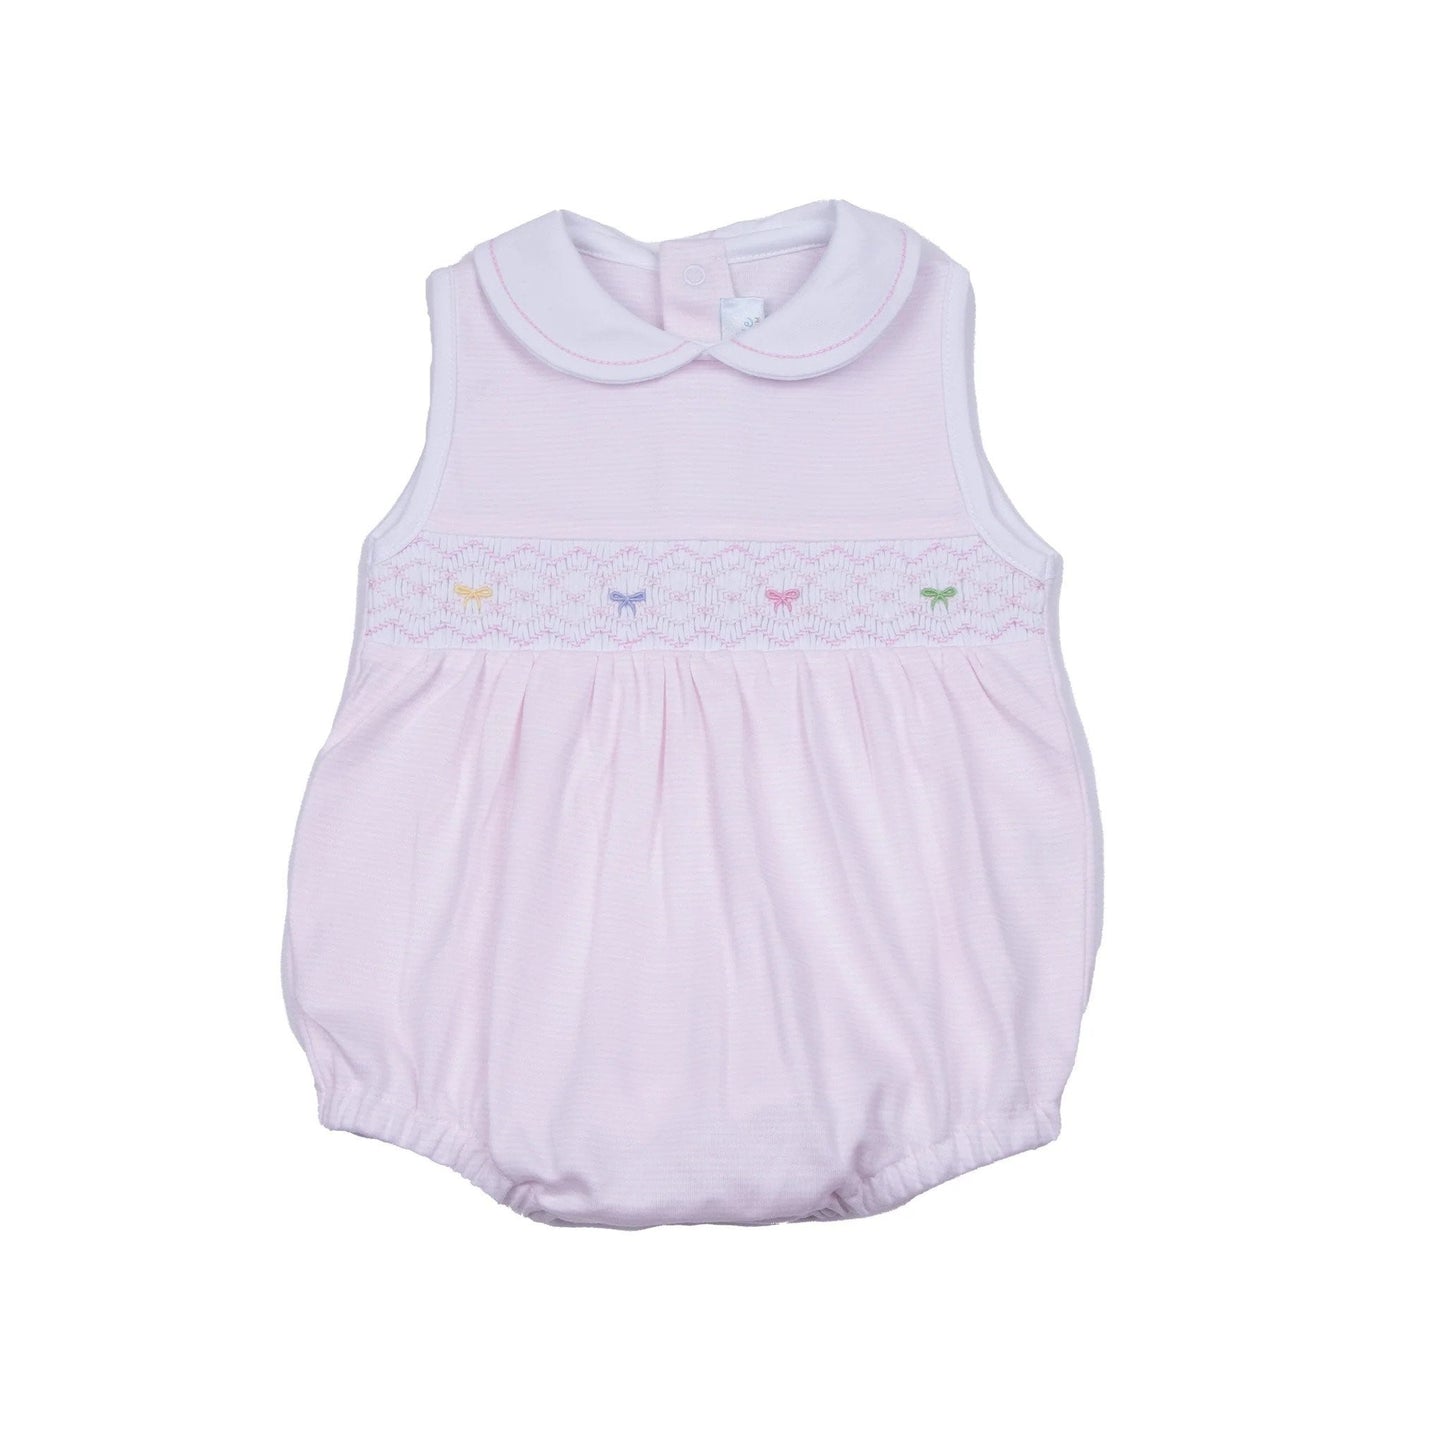 Cuclie Apparel 3 Mo / Pink Cuclie Bow Smocked Bubble Romper